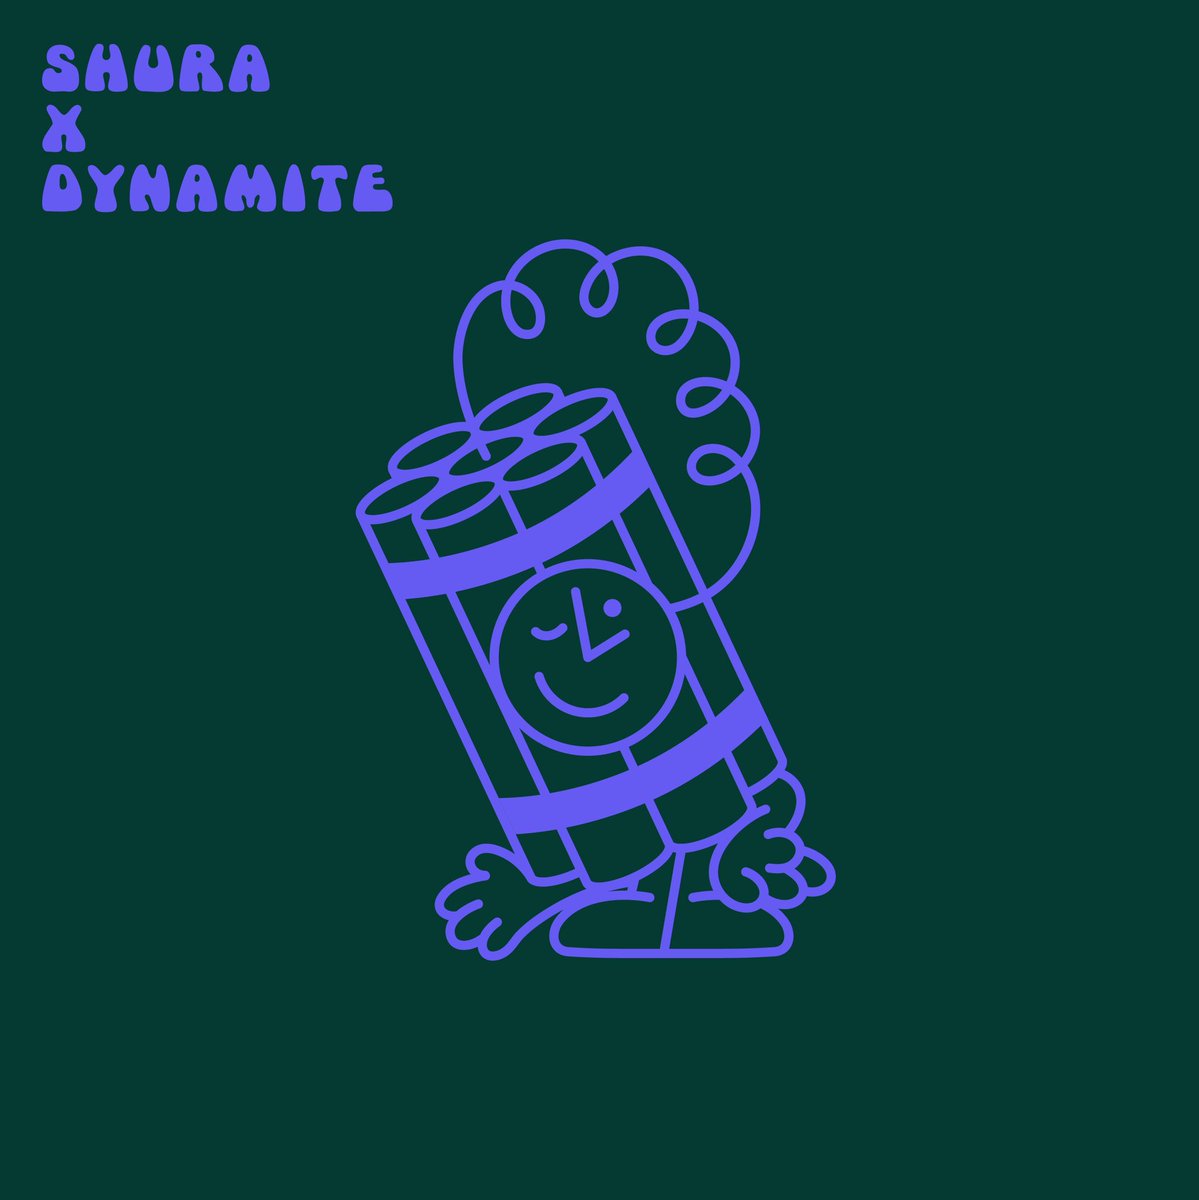 Here she is, our Dynamite, remixed by @shura 🧨 Get it at all the usual spots linktr.ee/SaintSister Artwork by Gavin Connell